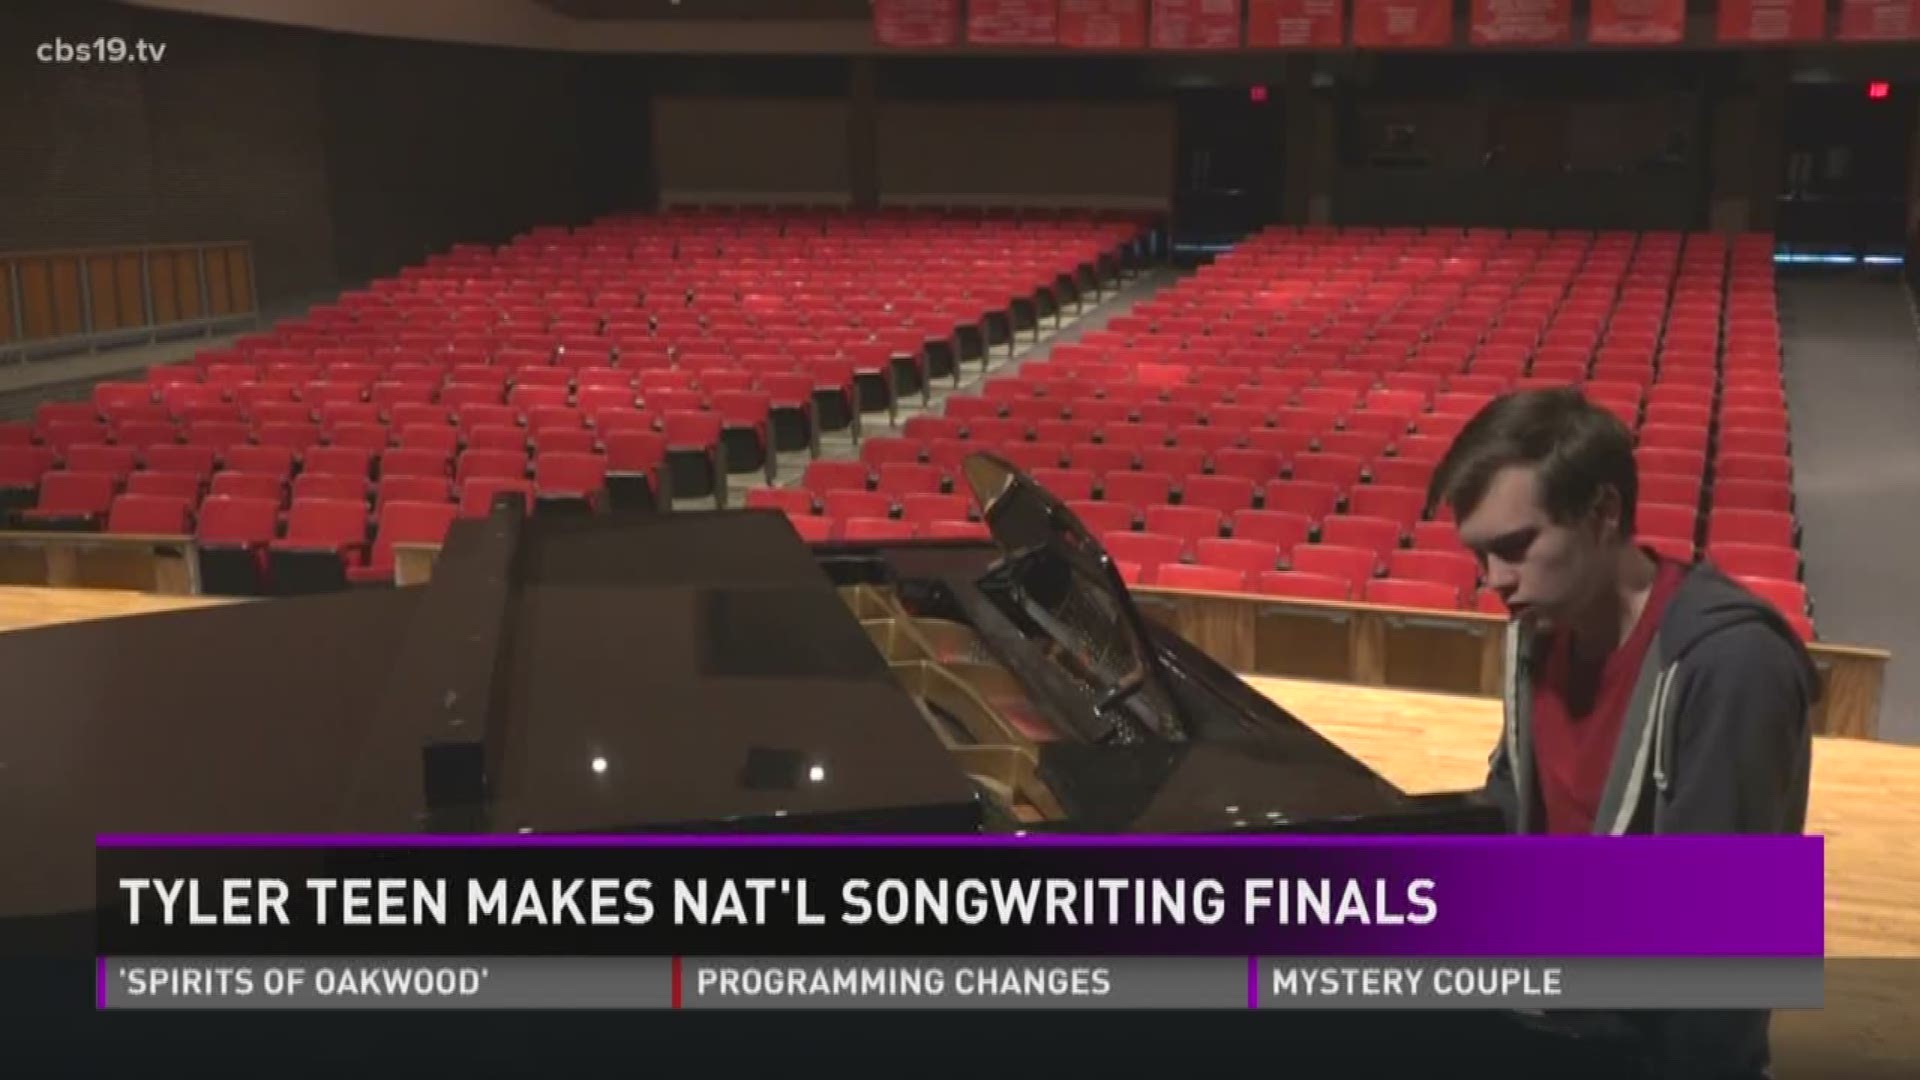 ETX Songwriter in the finals of a songwriting competition